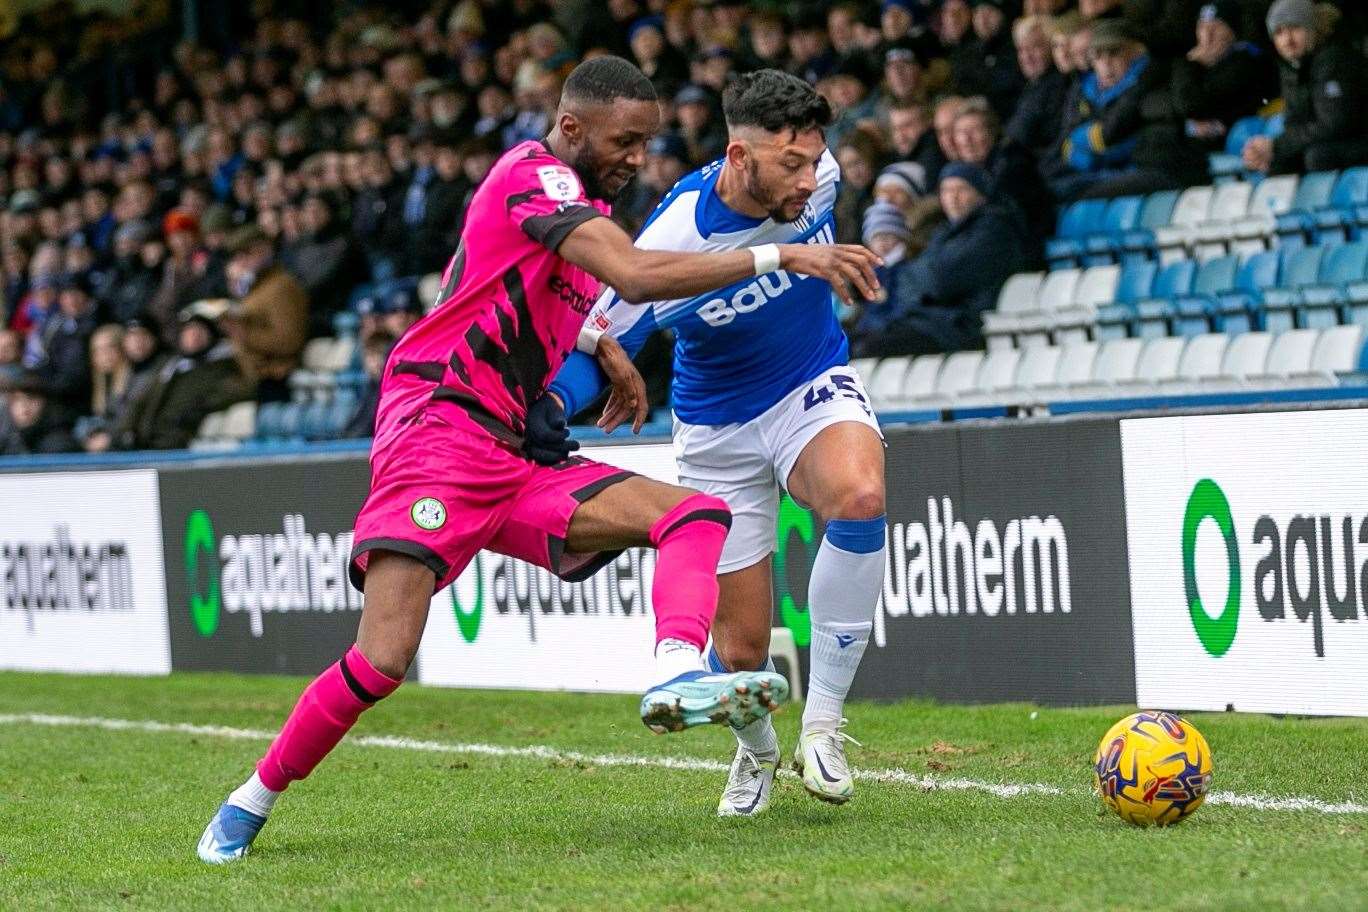 Macauley Bonne on the ball for Gillingham against Forest Green Rovers Picture: @Julian_KPI